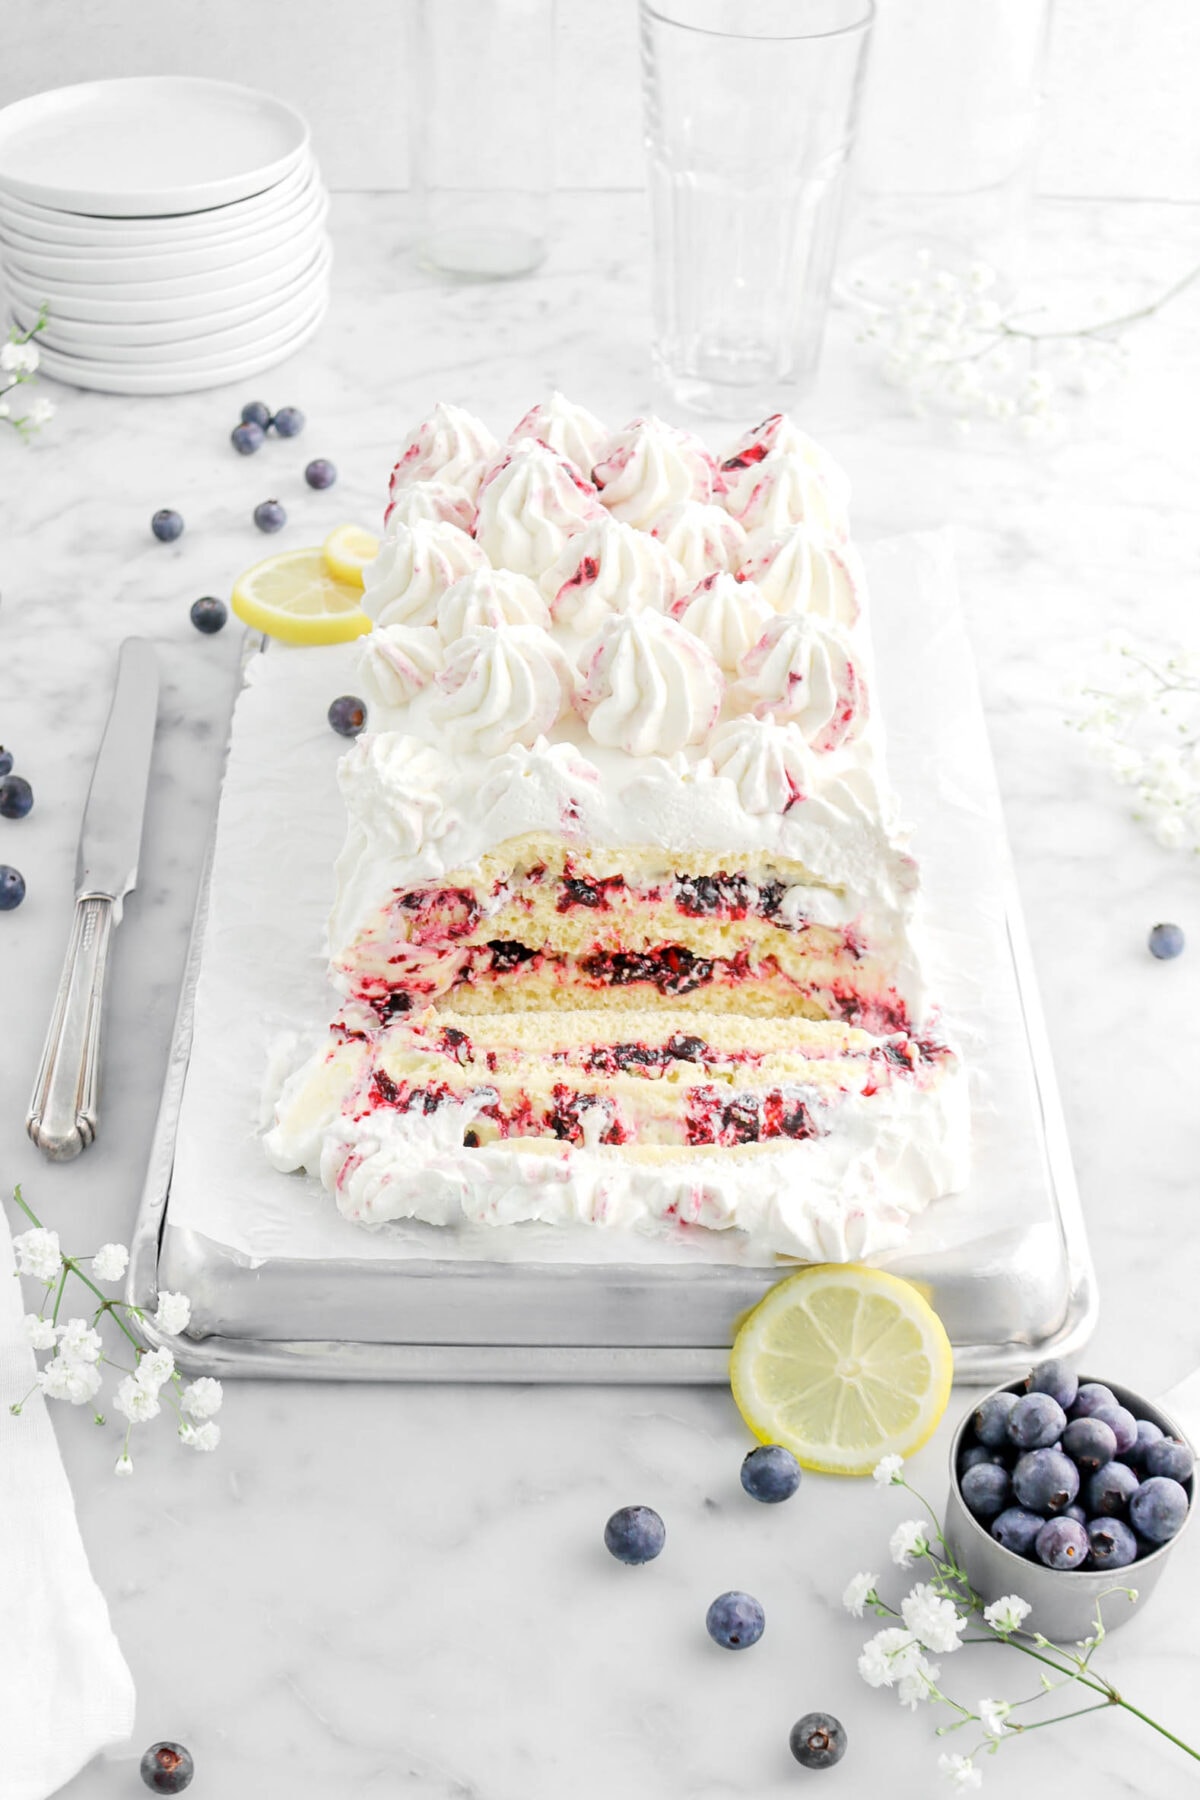 angled photo of lemon icebox cake with slice laying in front, a slice of lemon and blueberries around, with a knife and flowers beside